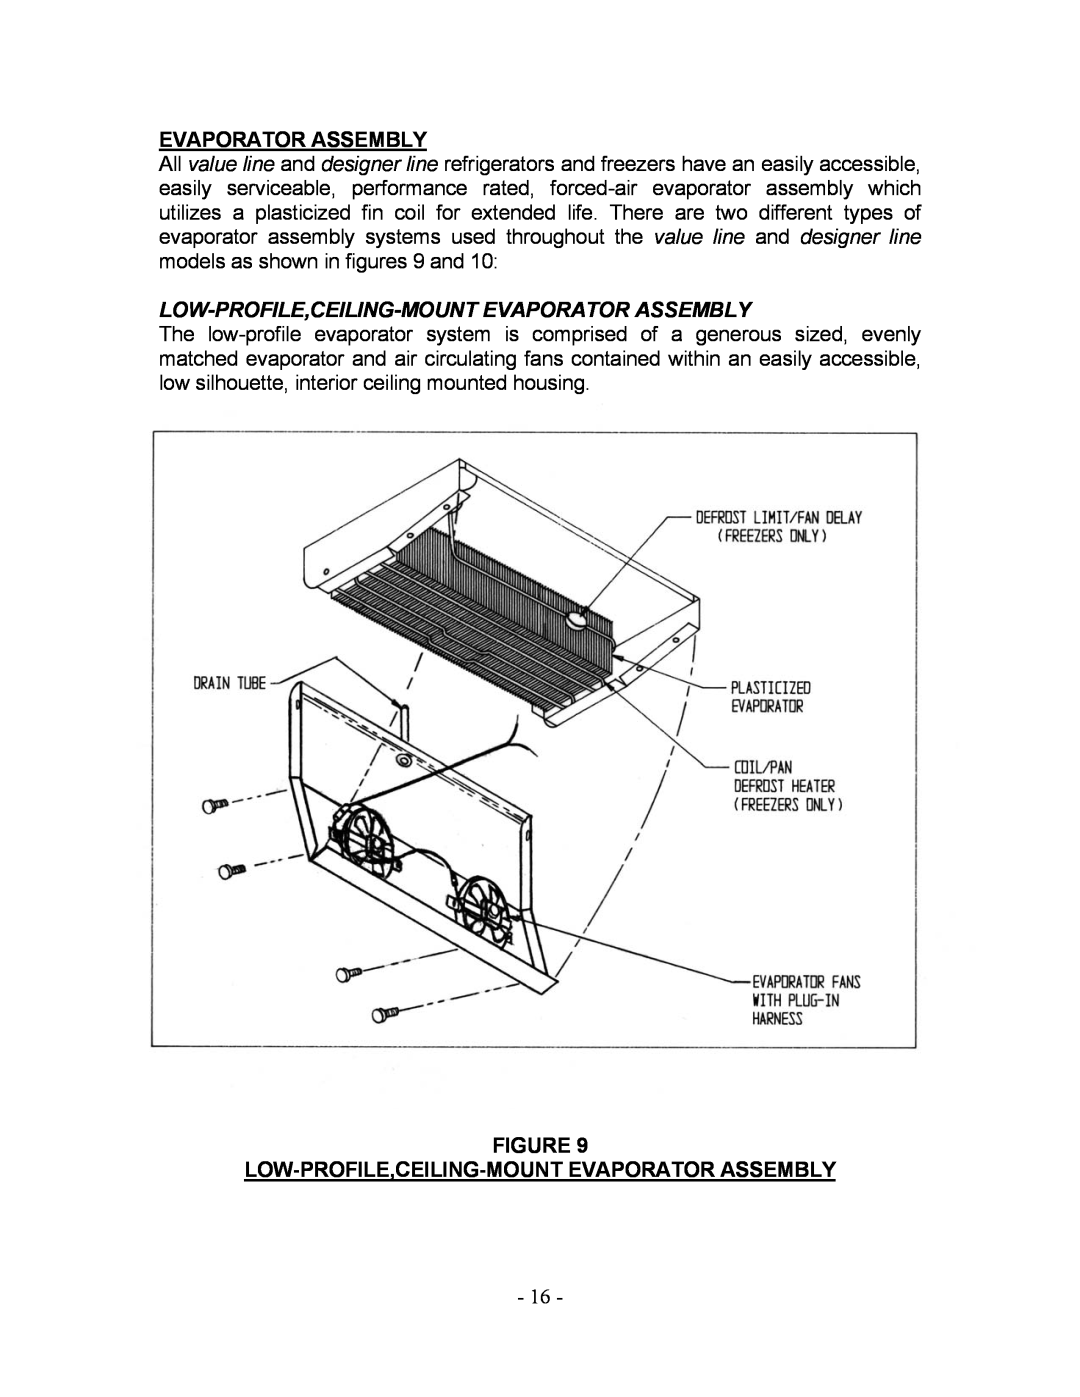 Bally Refrigerated Boxes Refrigerators/Freezers/Warmers manual Low-Profile,Ceiling-Mount Evaporator Assembly 